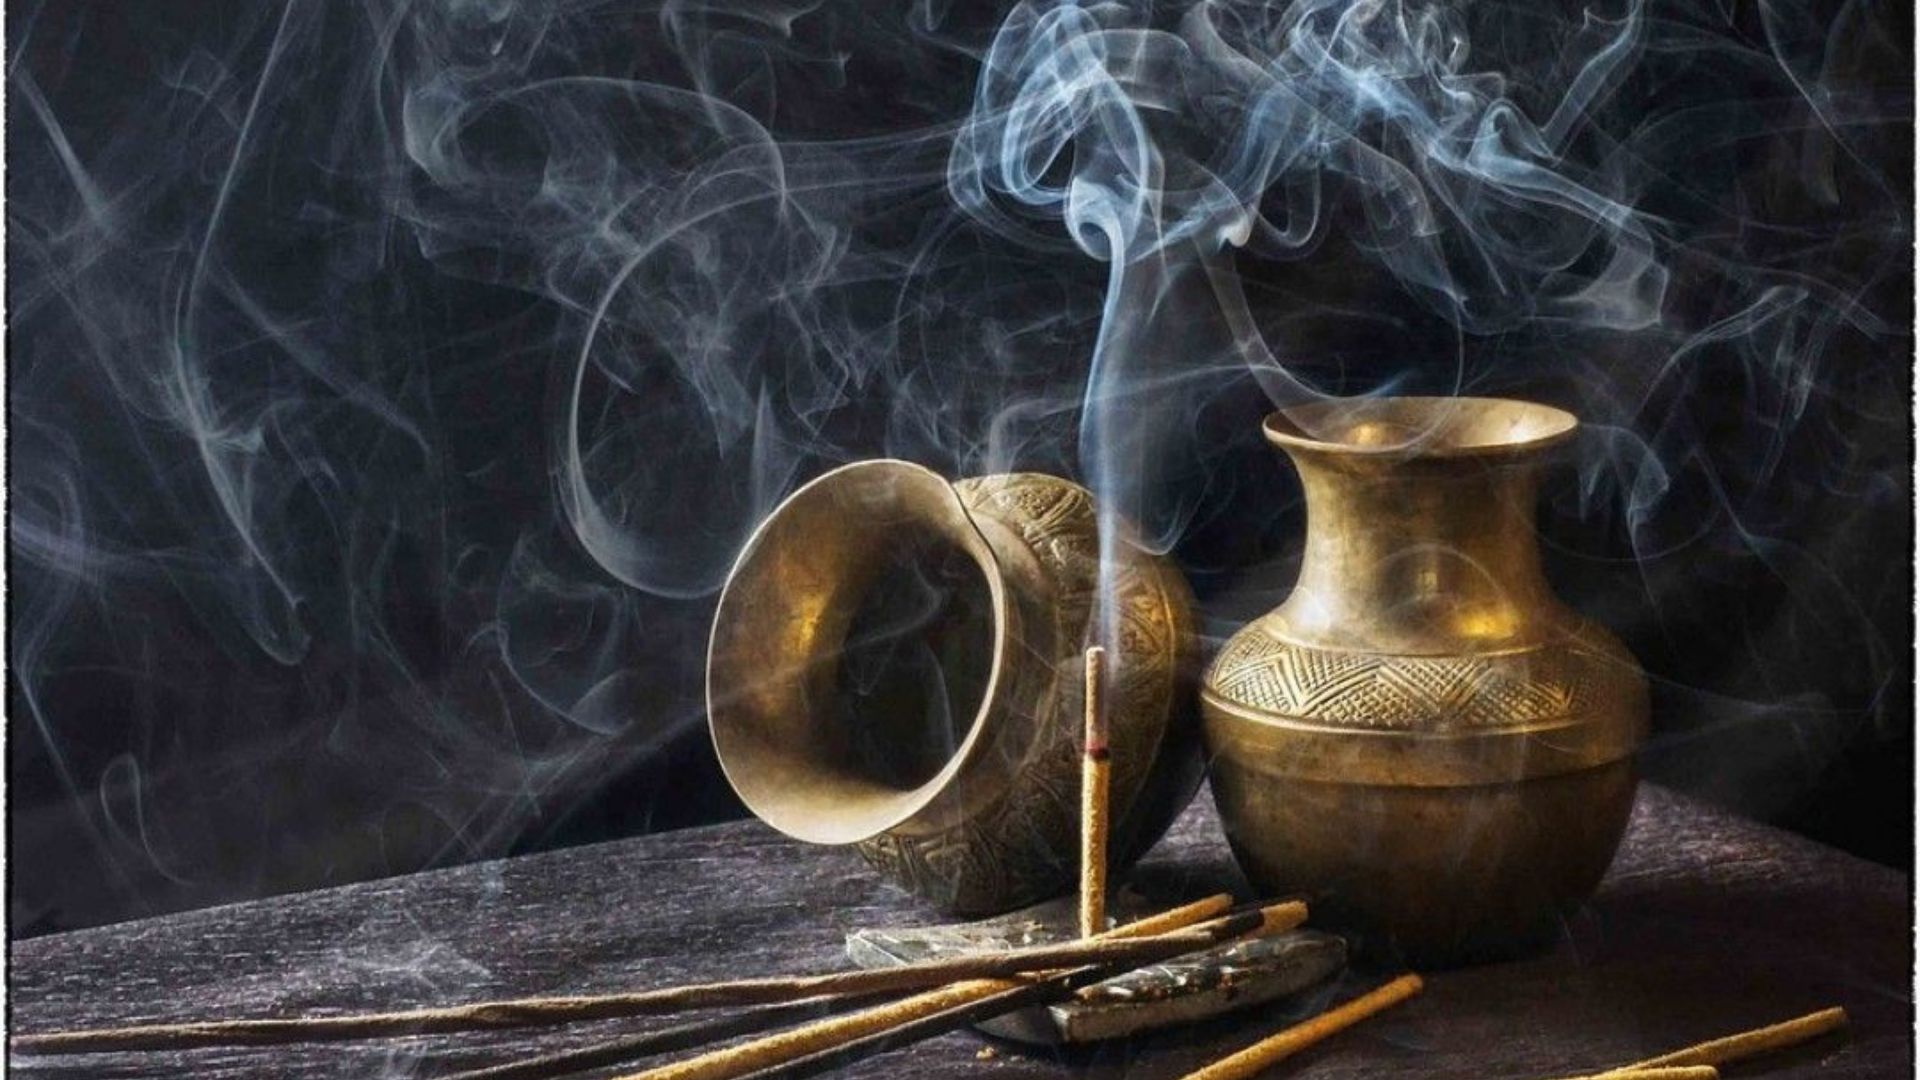 Two Golden Color Bowl With Smoke From A Stick